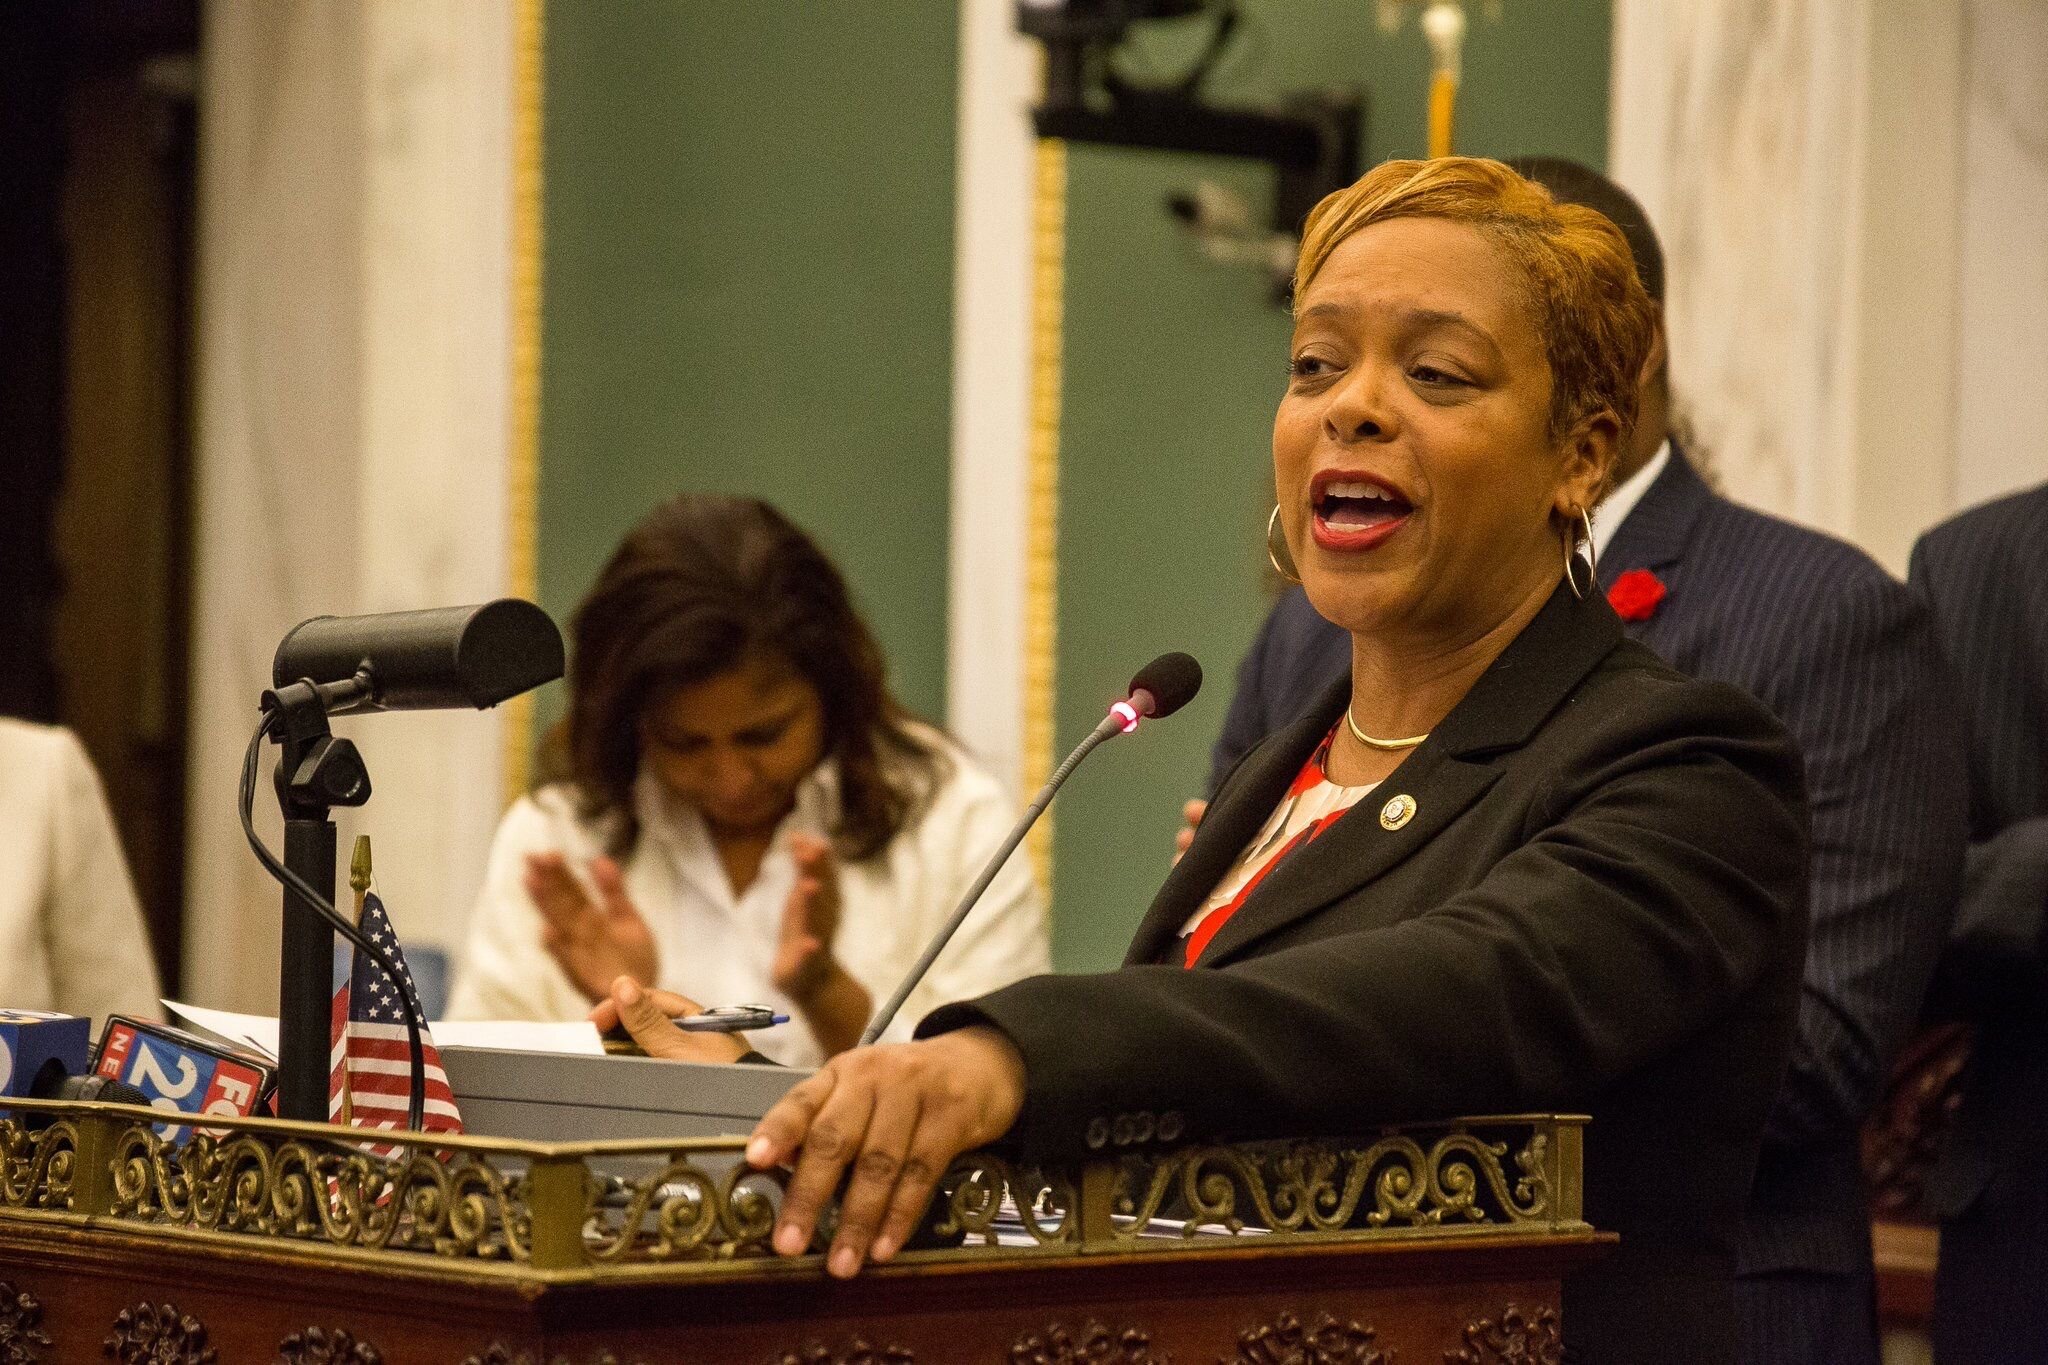 Councilwoman Cindy Bass worked with Toxic Free Philly to bring the bill before City Council this fall. Photograph courtesy of the Office of Councilwoman Cindy Bass